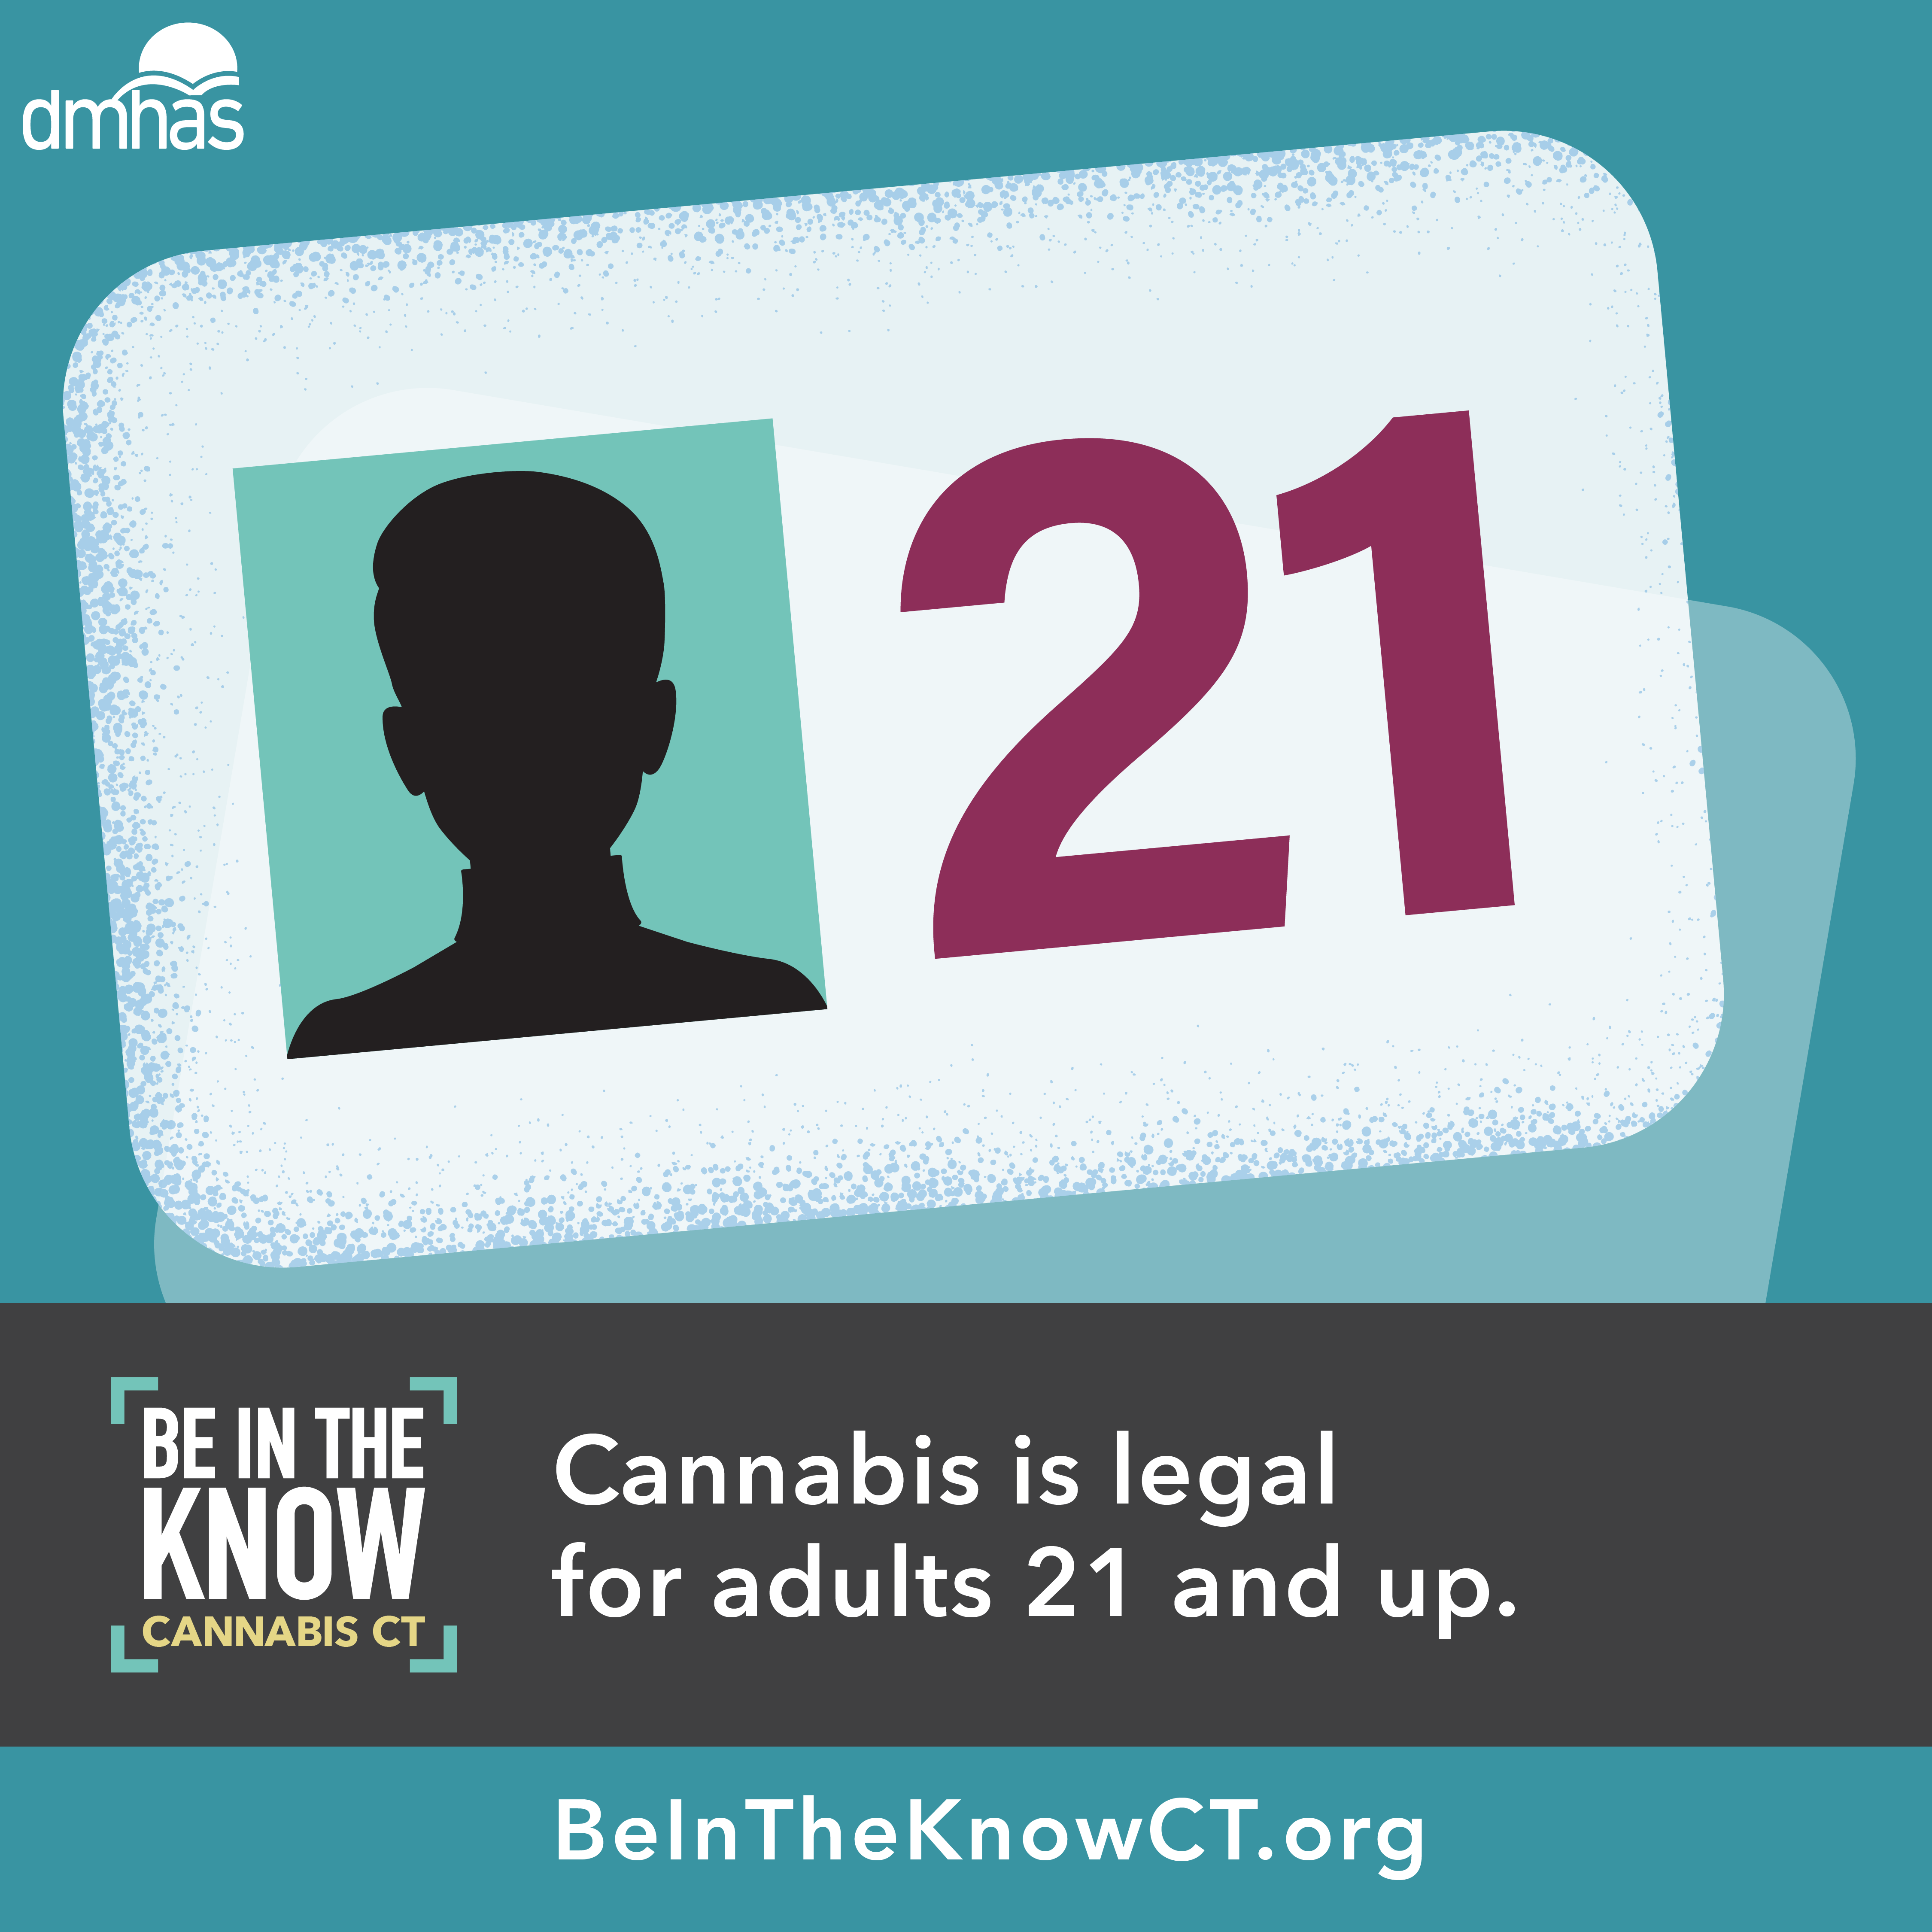 Cannabis is legal for adults 21 and up